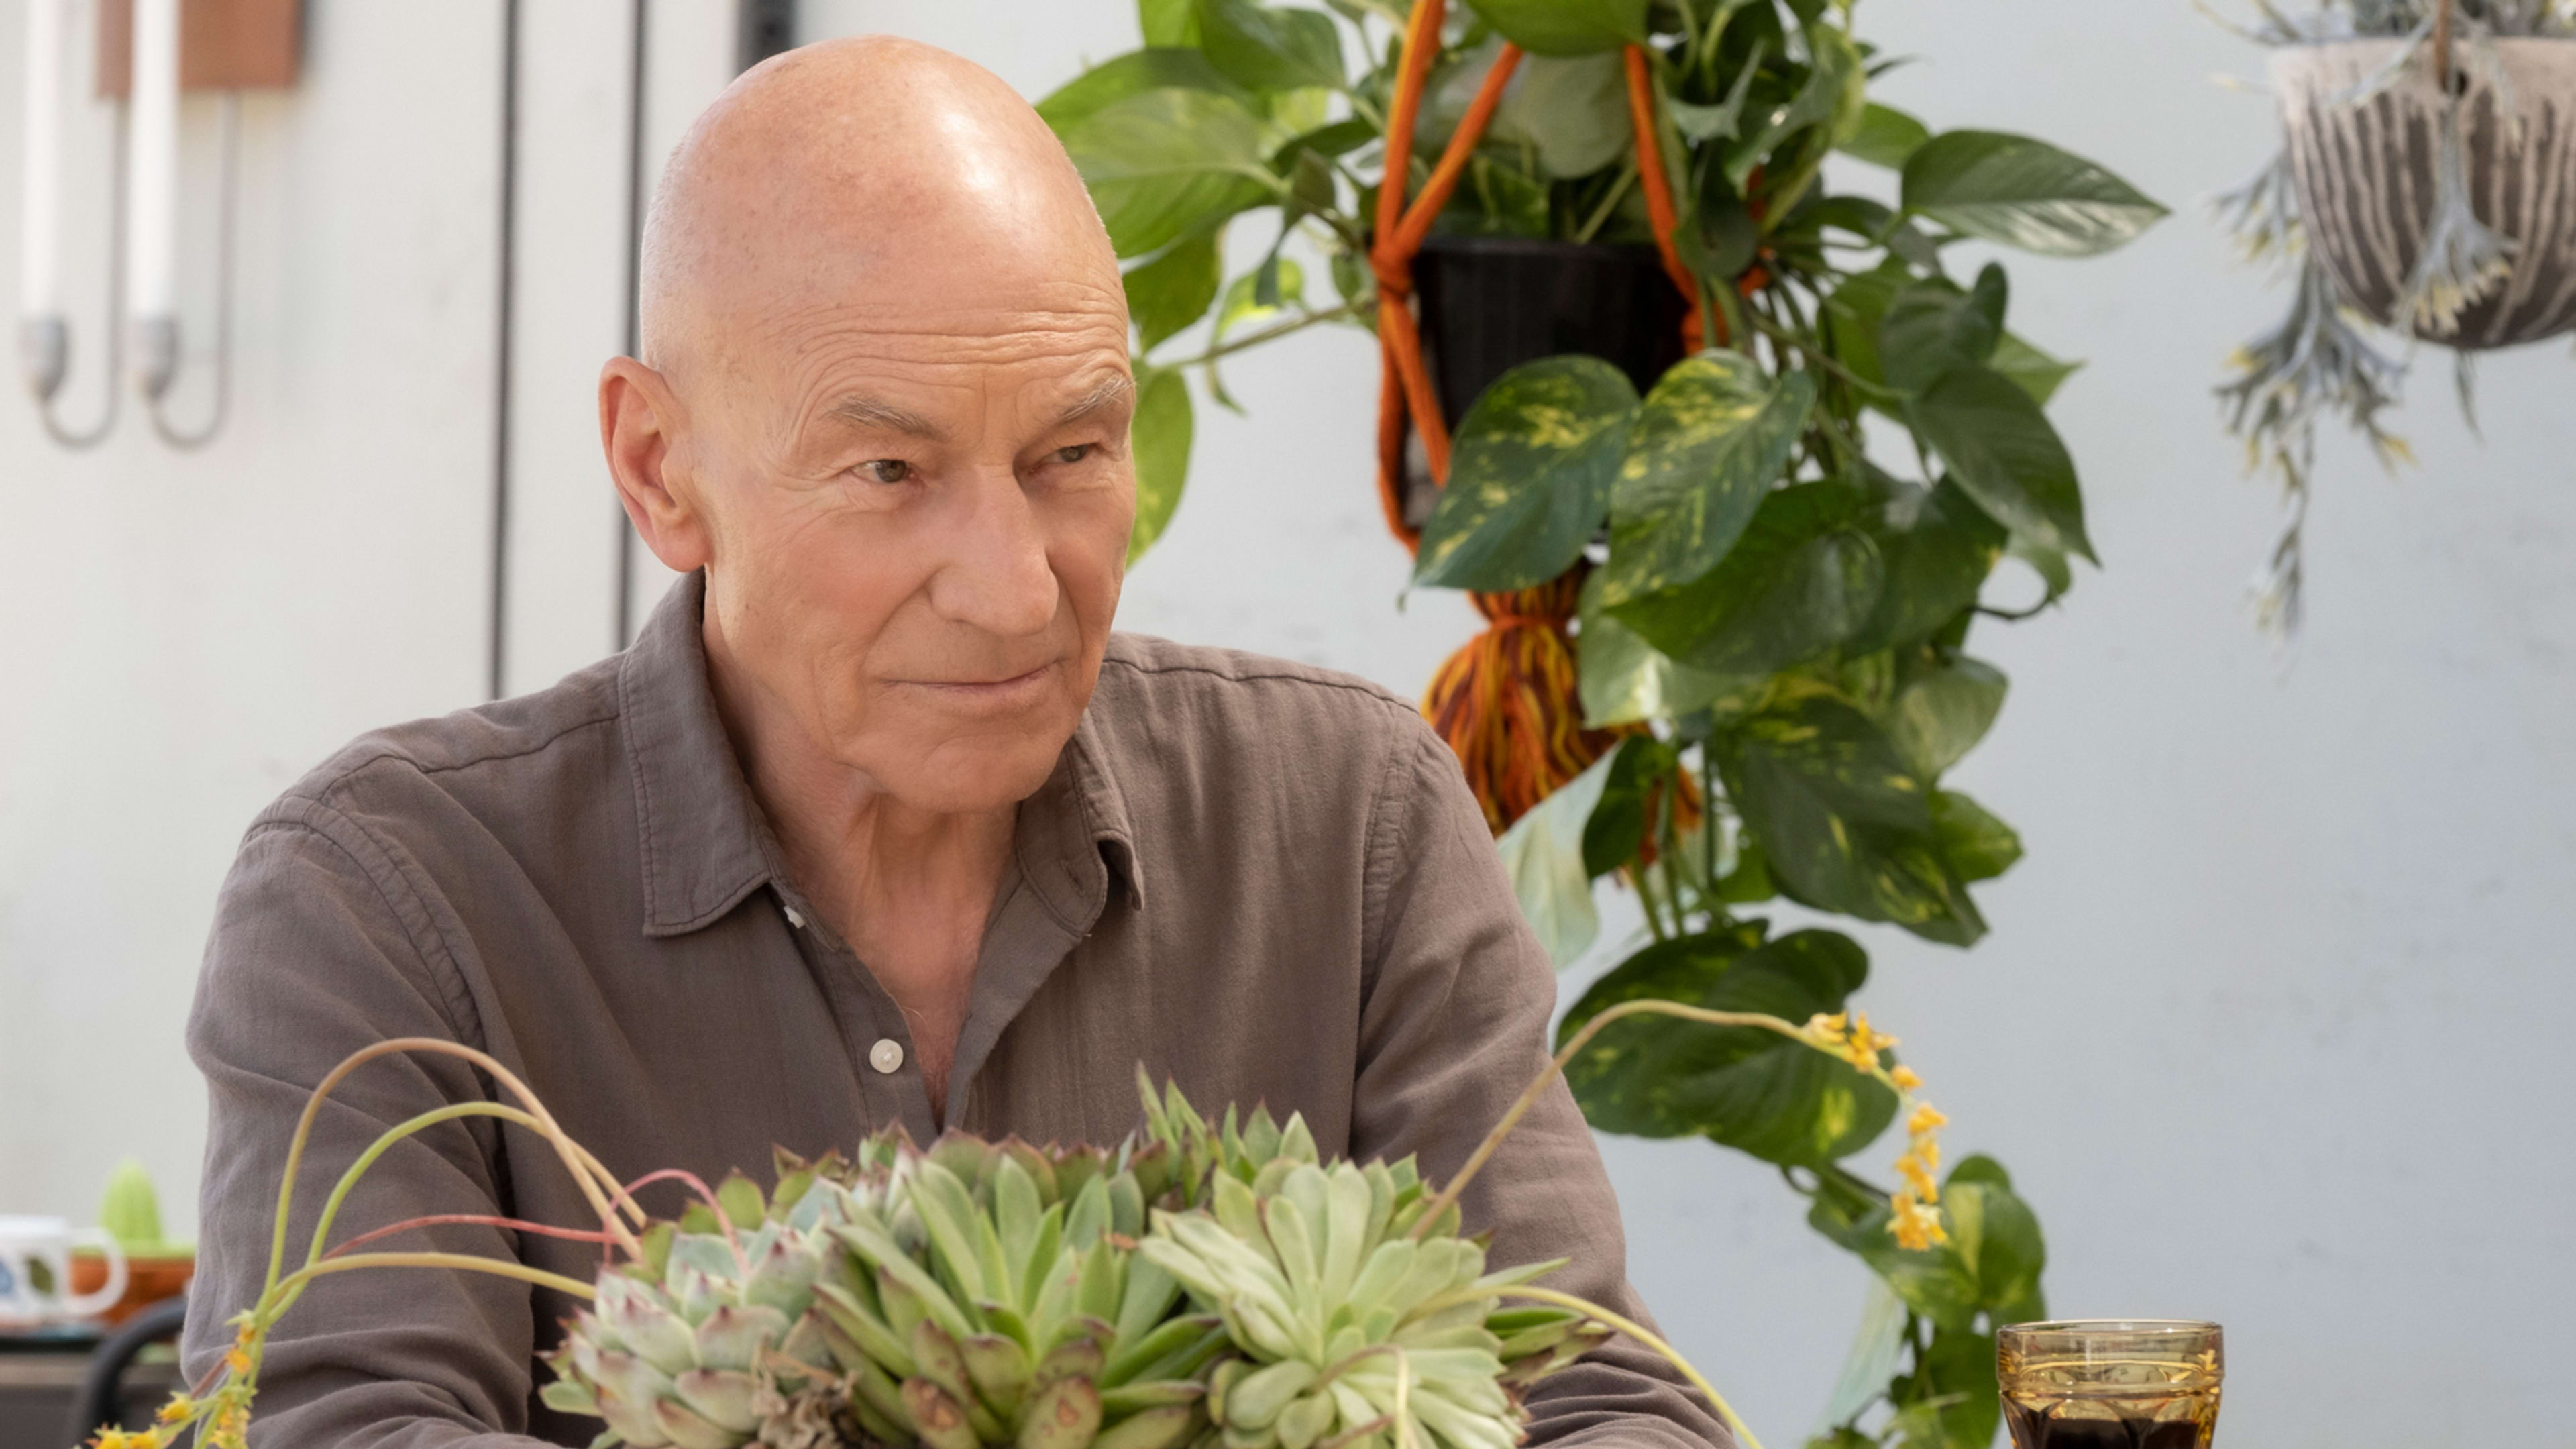 5 things Star Trek’s Captain Picard can teach you about leadership